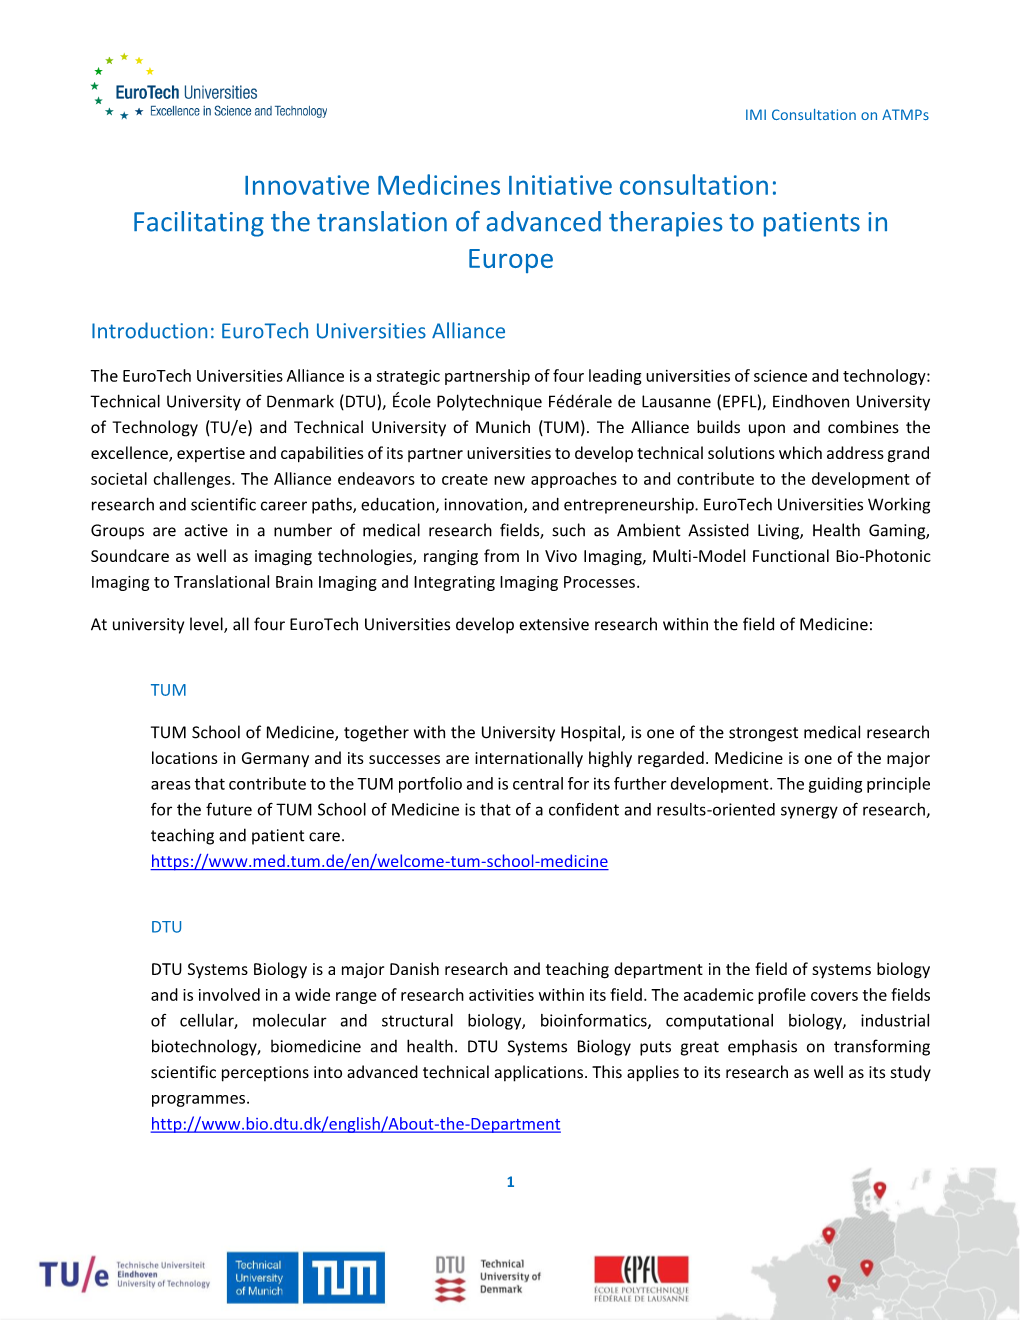 Innovative Medicines Initiative Consultation: Facilitating the Translation of Advanced Therapies to Patients in Europe